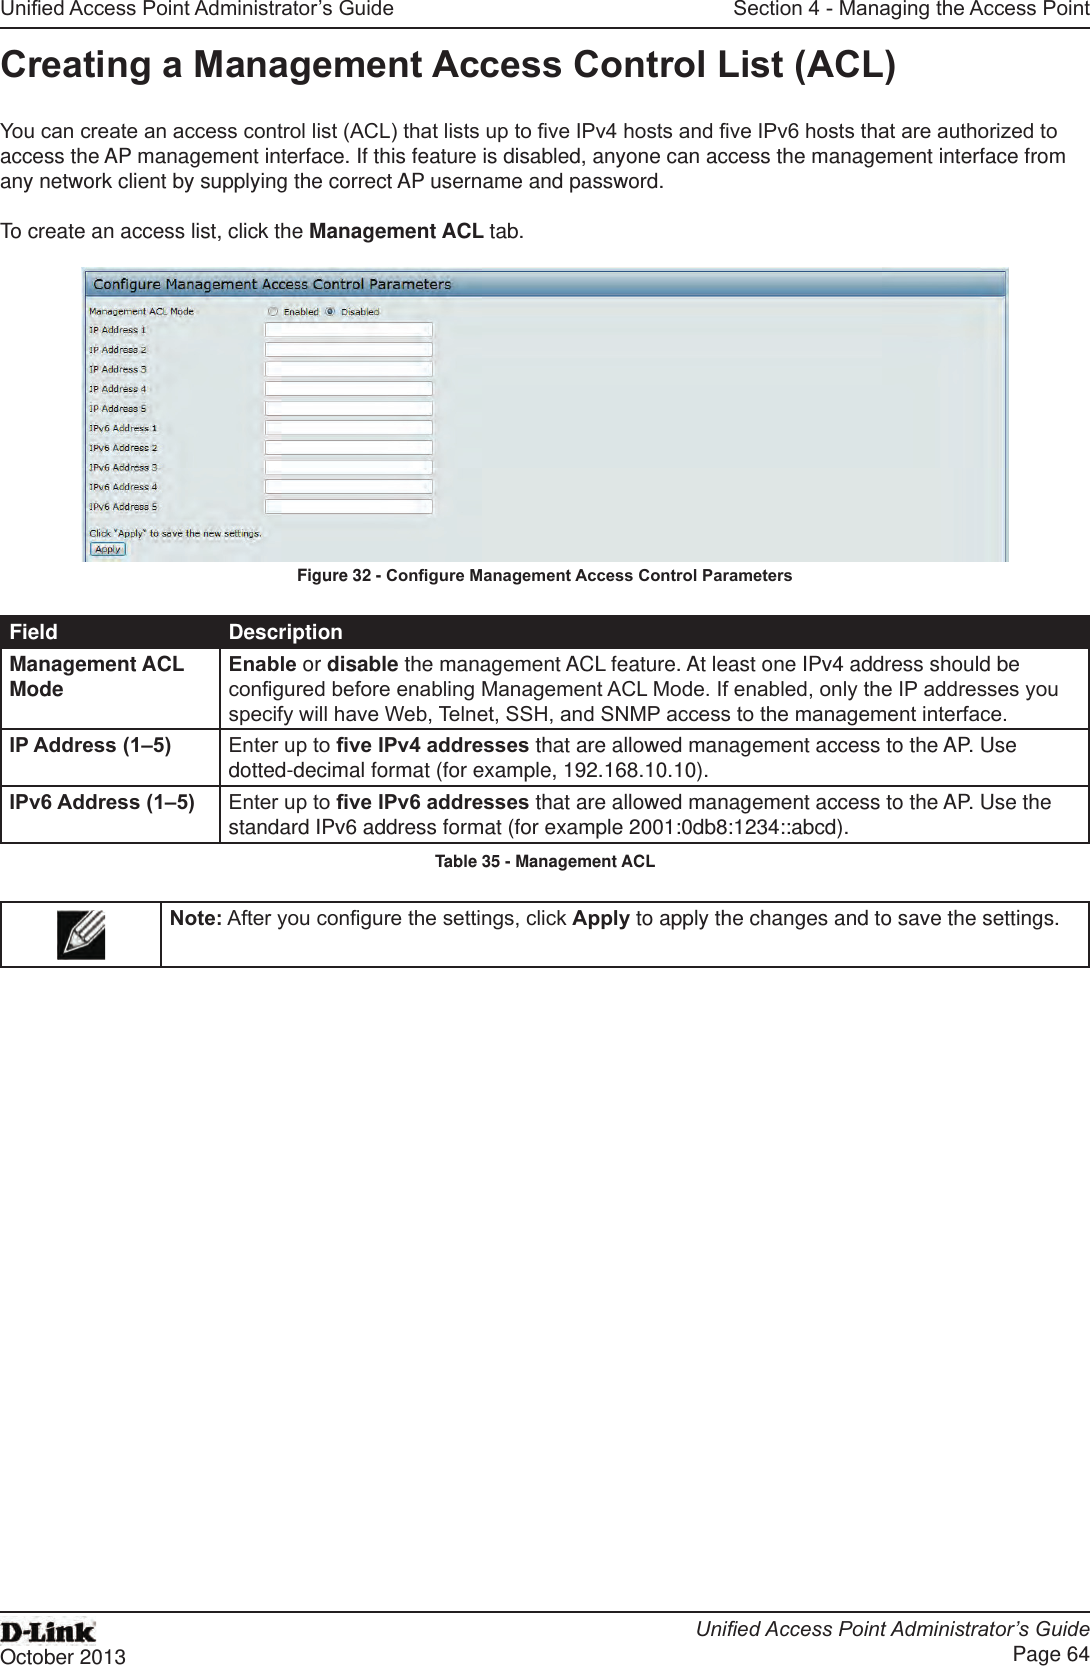 Unied Access Point Administrator’s GuideUnied Access Point Administrator’s GuidePage 64October 2013Section 4 - Managing the Access PointCreating a Management Access Control List (ACL)You can create an access control list (ACL) that lists up to ve IPv4 hosts and ve IPv6 hosts that are authorized to access the AP management interface. If this feature is disabled, anyone can access the management interface from any network client by supplying the correct AP username and password.To create an access list, click the Management ACL tab.Figure 32 - Congure Management Access Control ParametersField DescriptionManagement ACL Mode Enable or disable the management ACL feature. At least one IPv4 address should be congured before enabling Management ACL Mode. If enabled, only the IP addresses you specify will have Web, Telnet, SSH, and SNMP access to the management interface.IP Address (1–5) Enter up to ve IPv4 addresses that are allowed management access to the AP. Use dotted-decimal format (for example, 192.168.10.10).IPv6 Address (1–5) Enter up to ve IPv6 addresses that are allowed management access to the AP. Use the standard IPv6 address format (for example 2001:0db8:1234::abcd).Table 35 - Management ACLNote: After you congure the settings, click Apply to apply the changes and to save the settings.